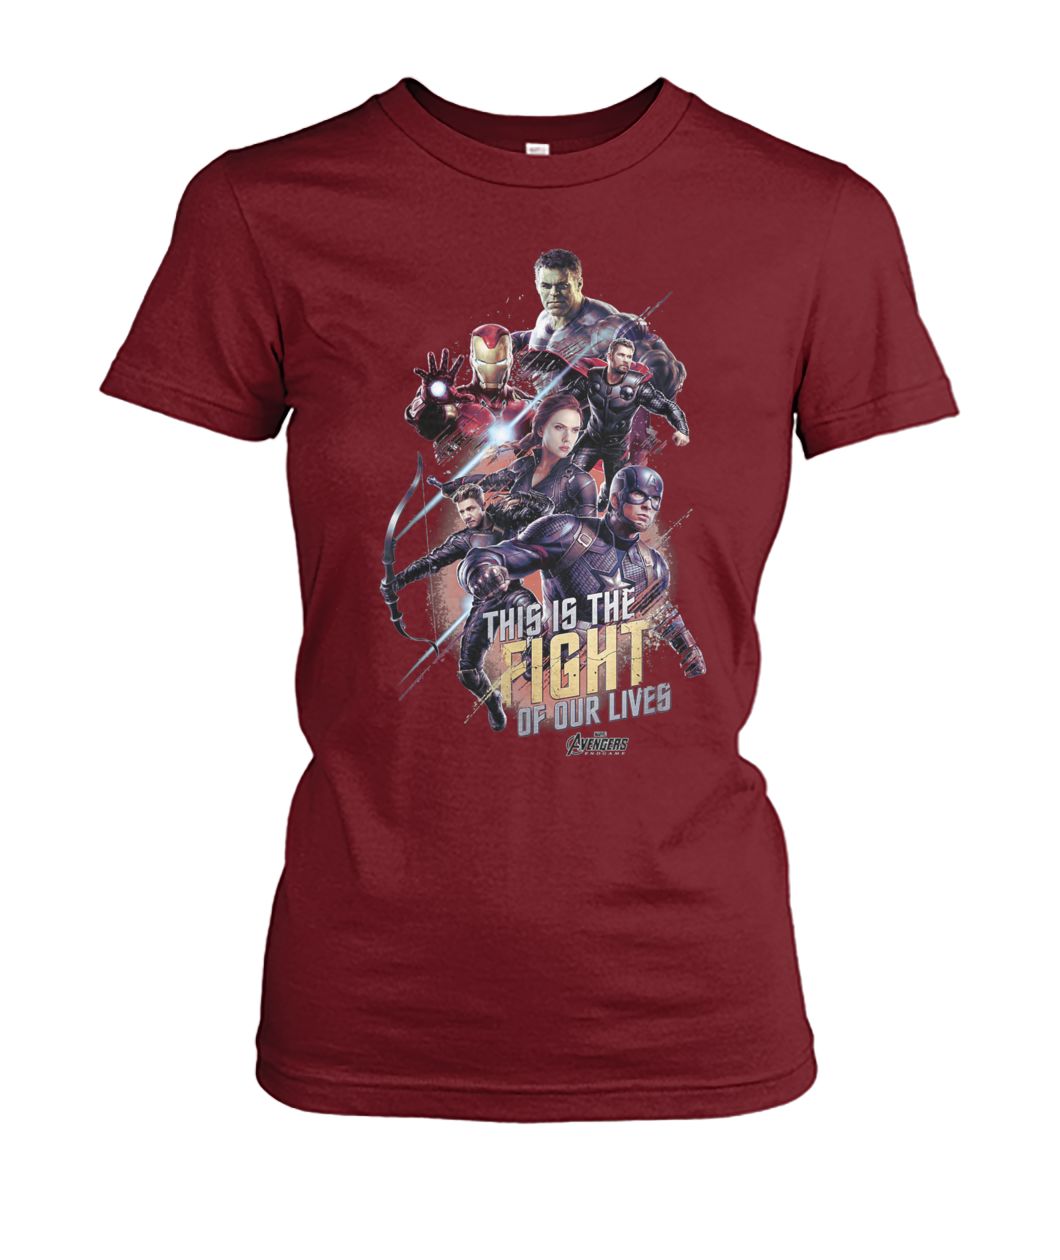 Marvel avengers endgame this is the fight of our lives women's crew tee